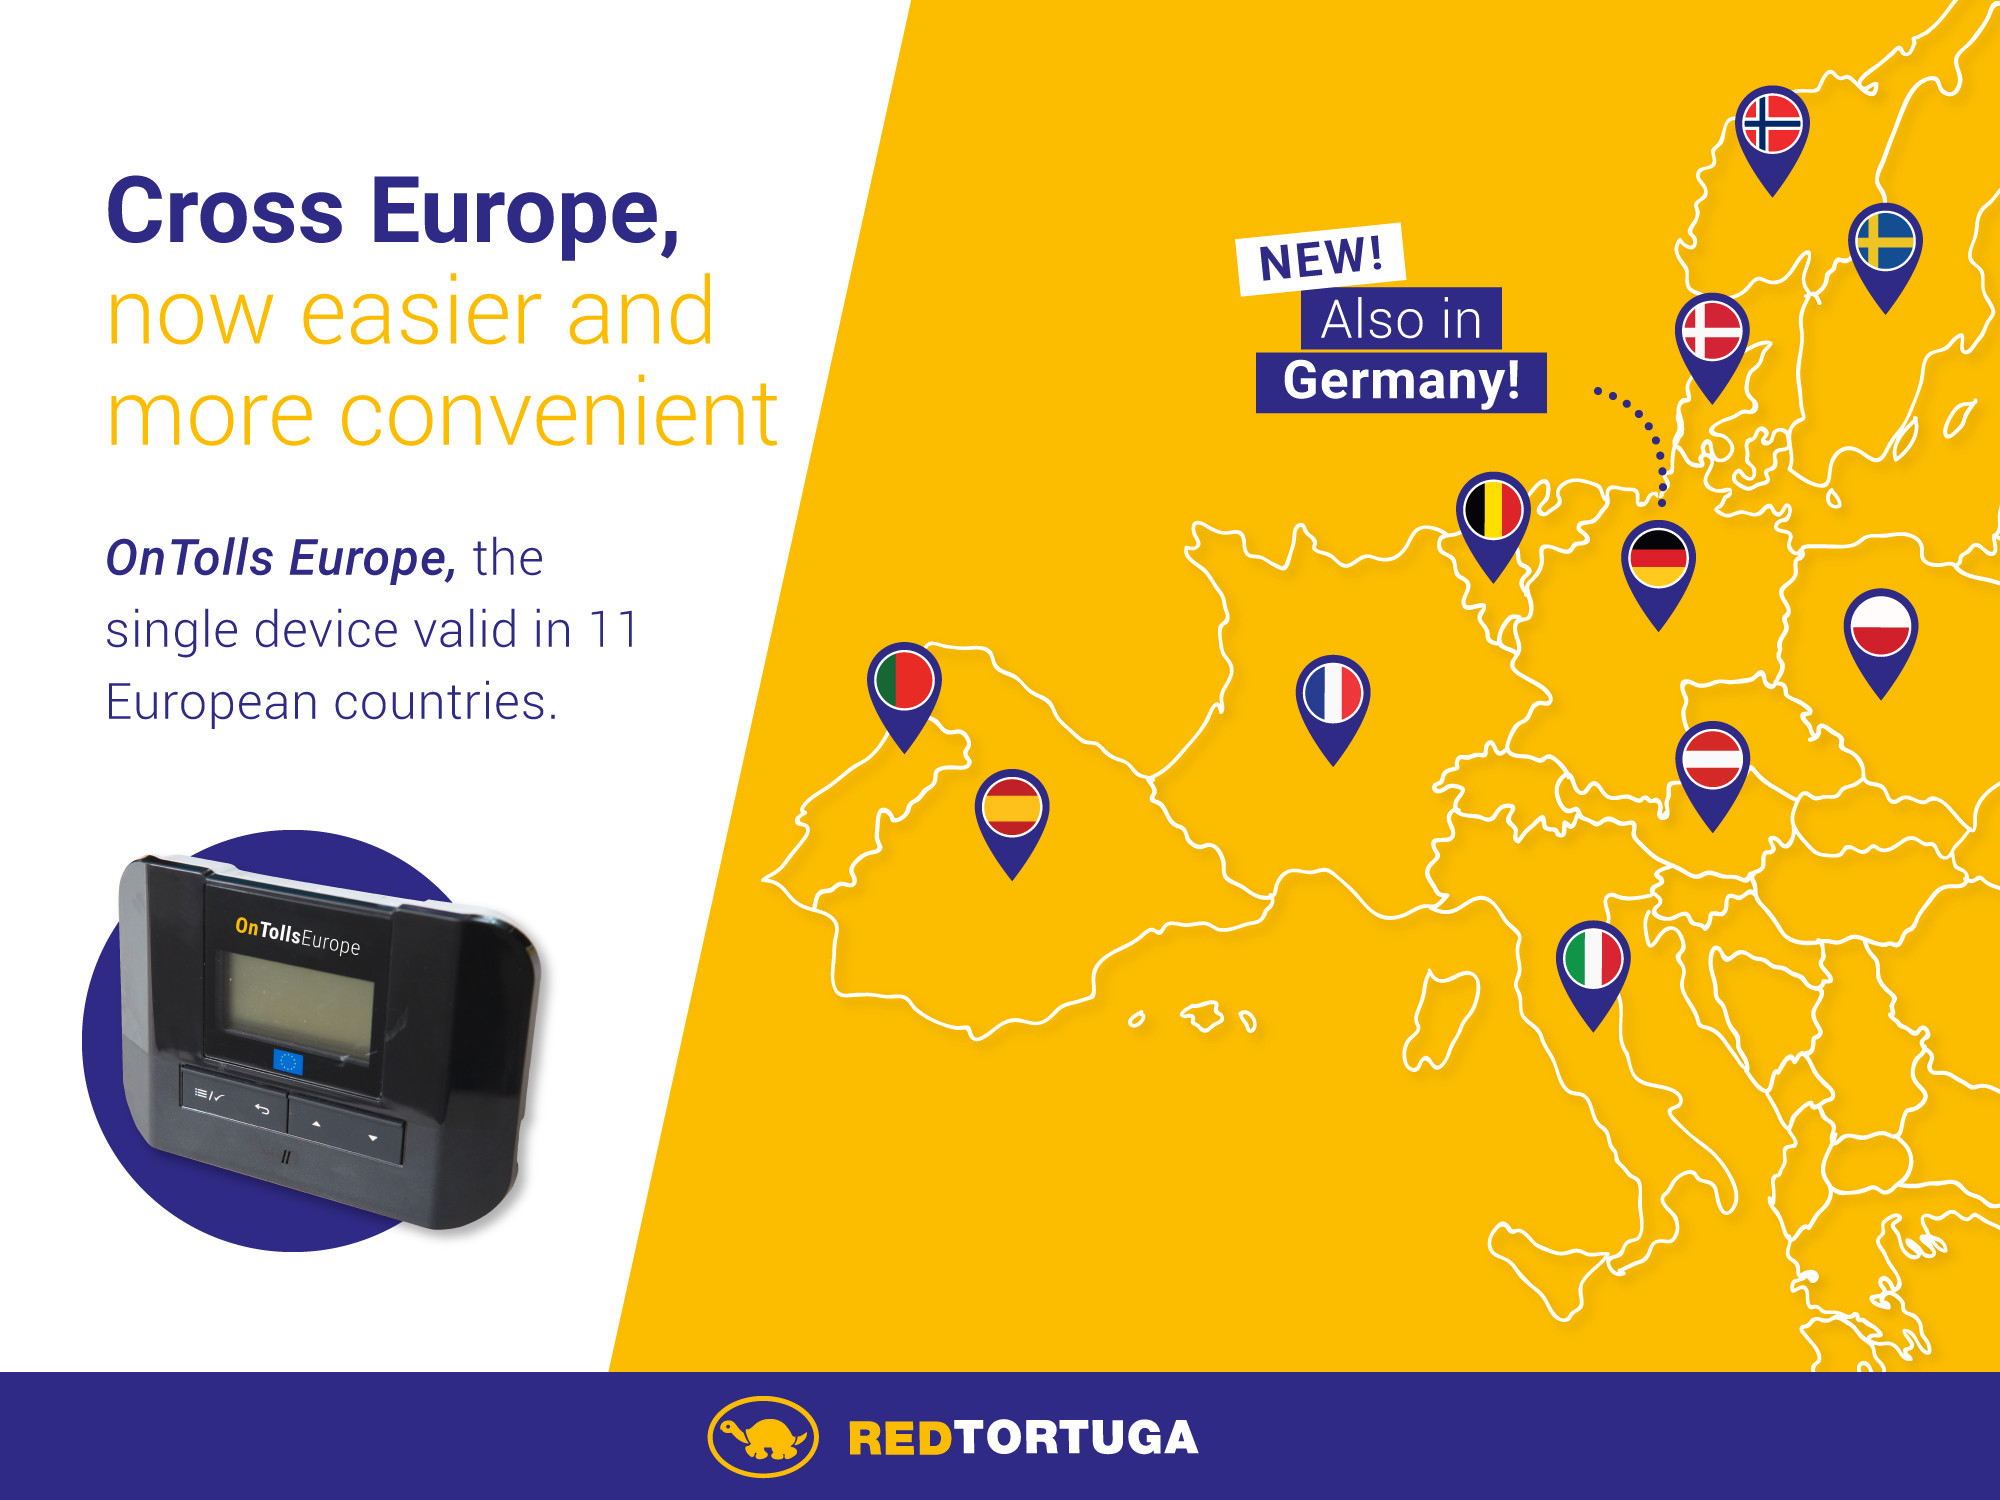 OnTolls Europe is here, the new single toll device